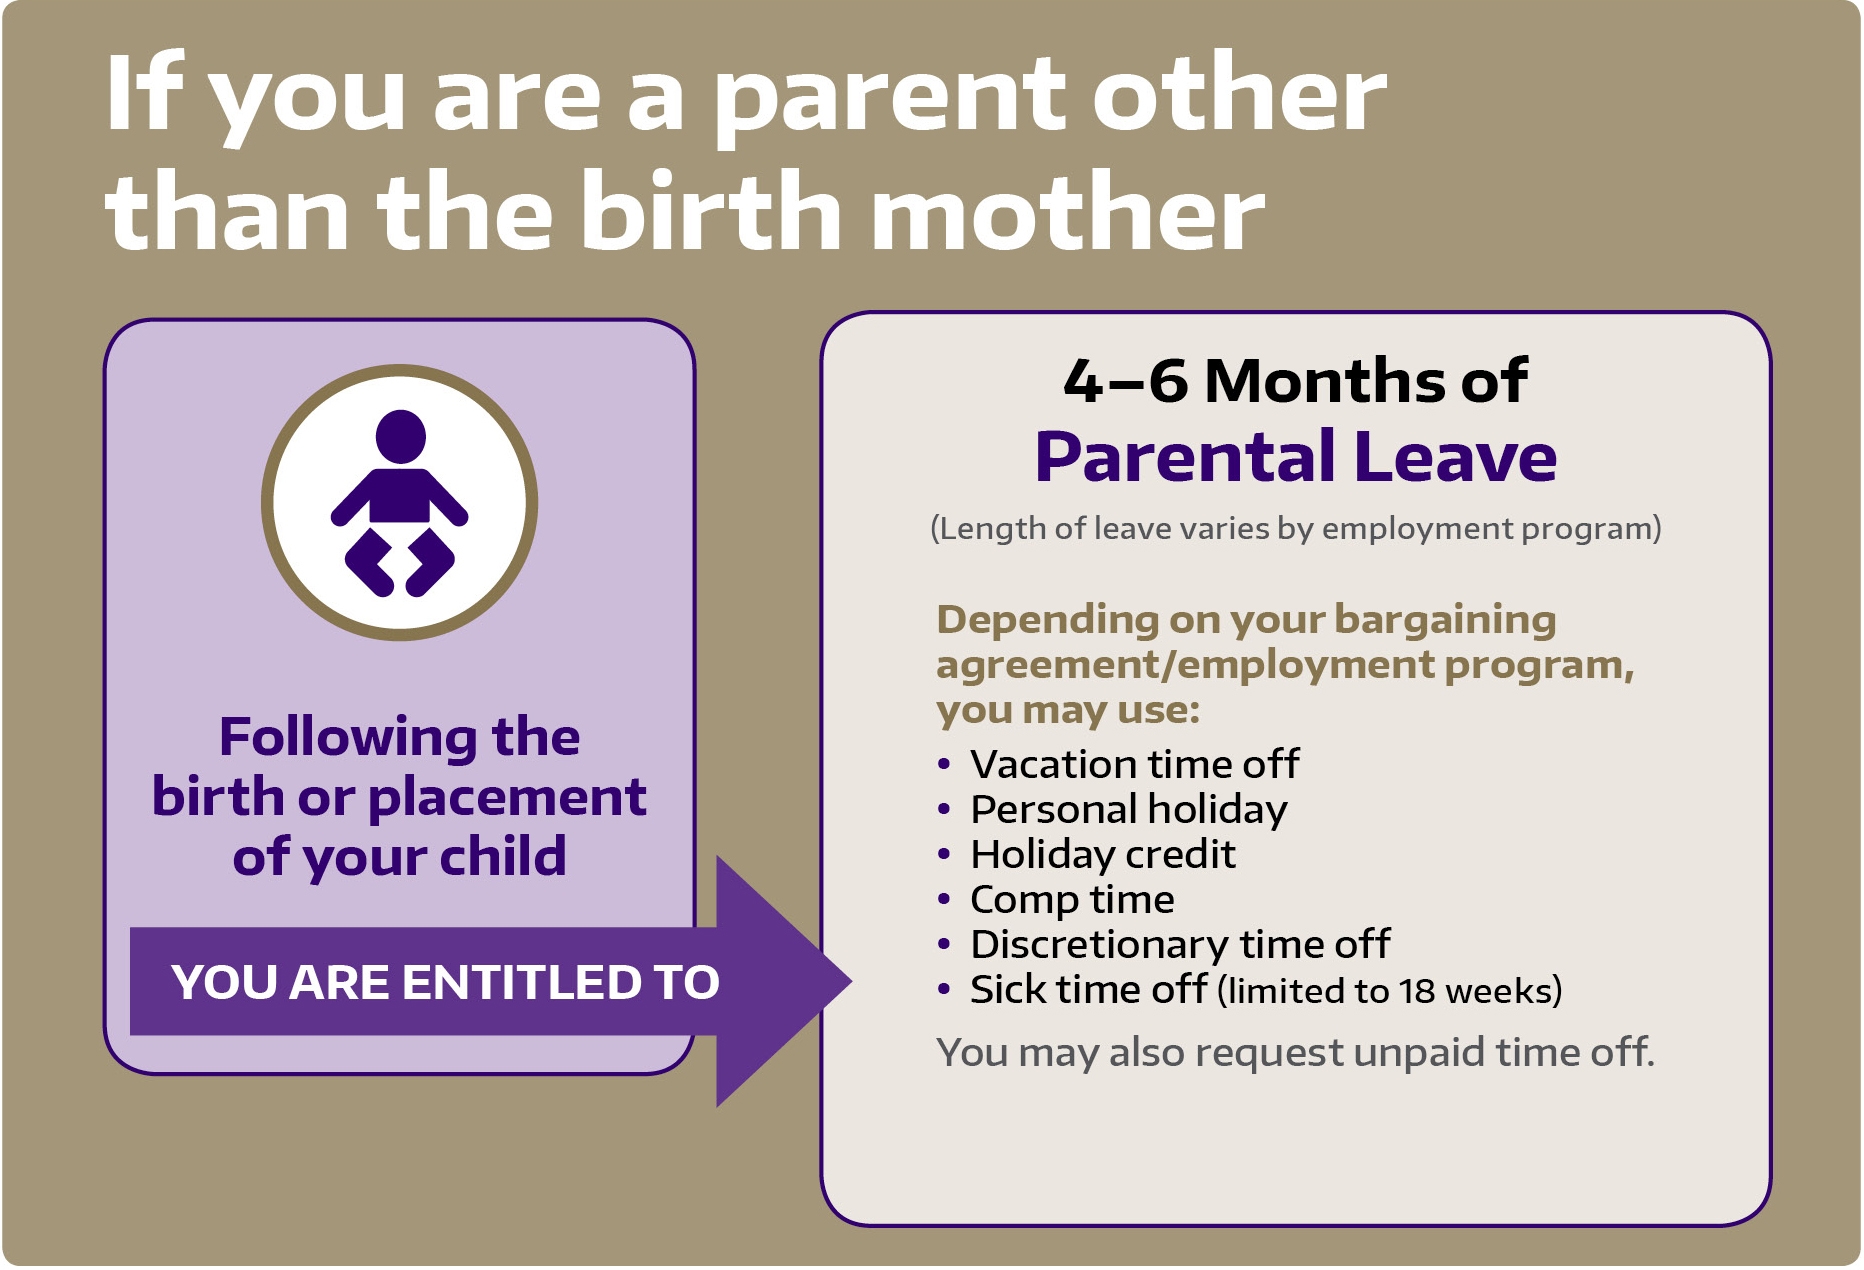 Parental Leave - other than the birth mother